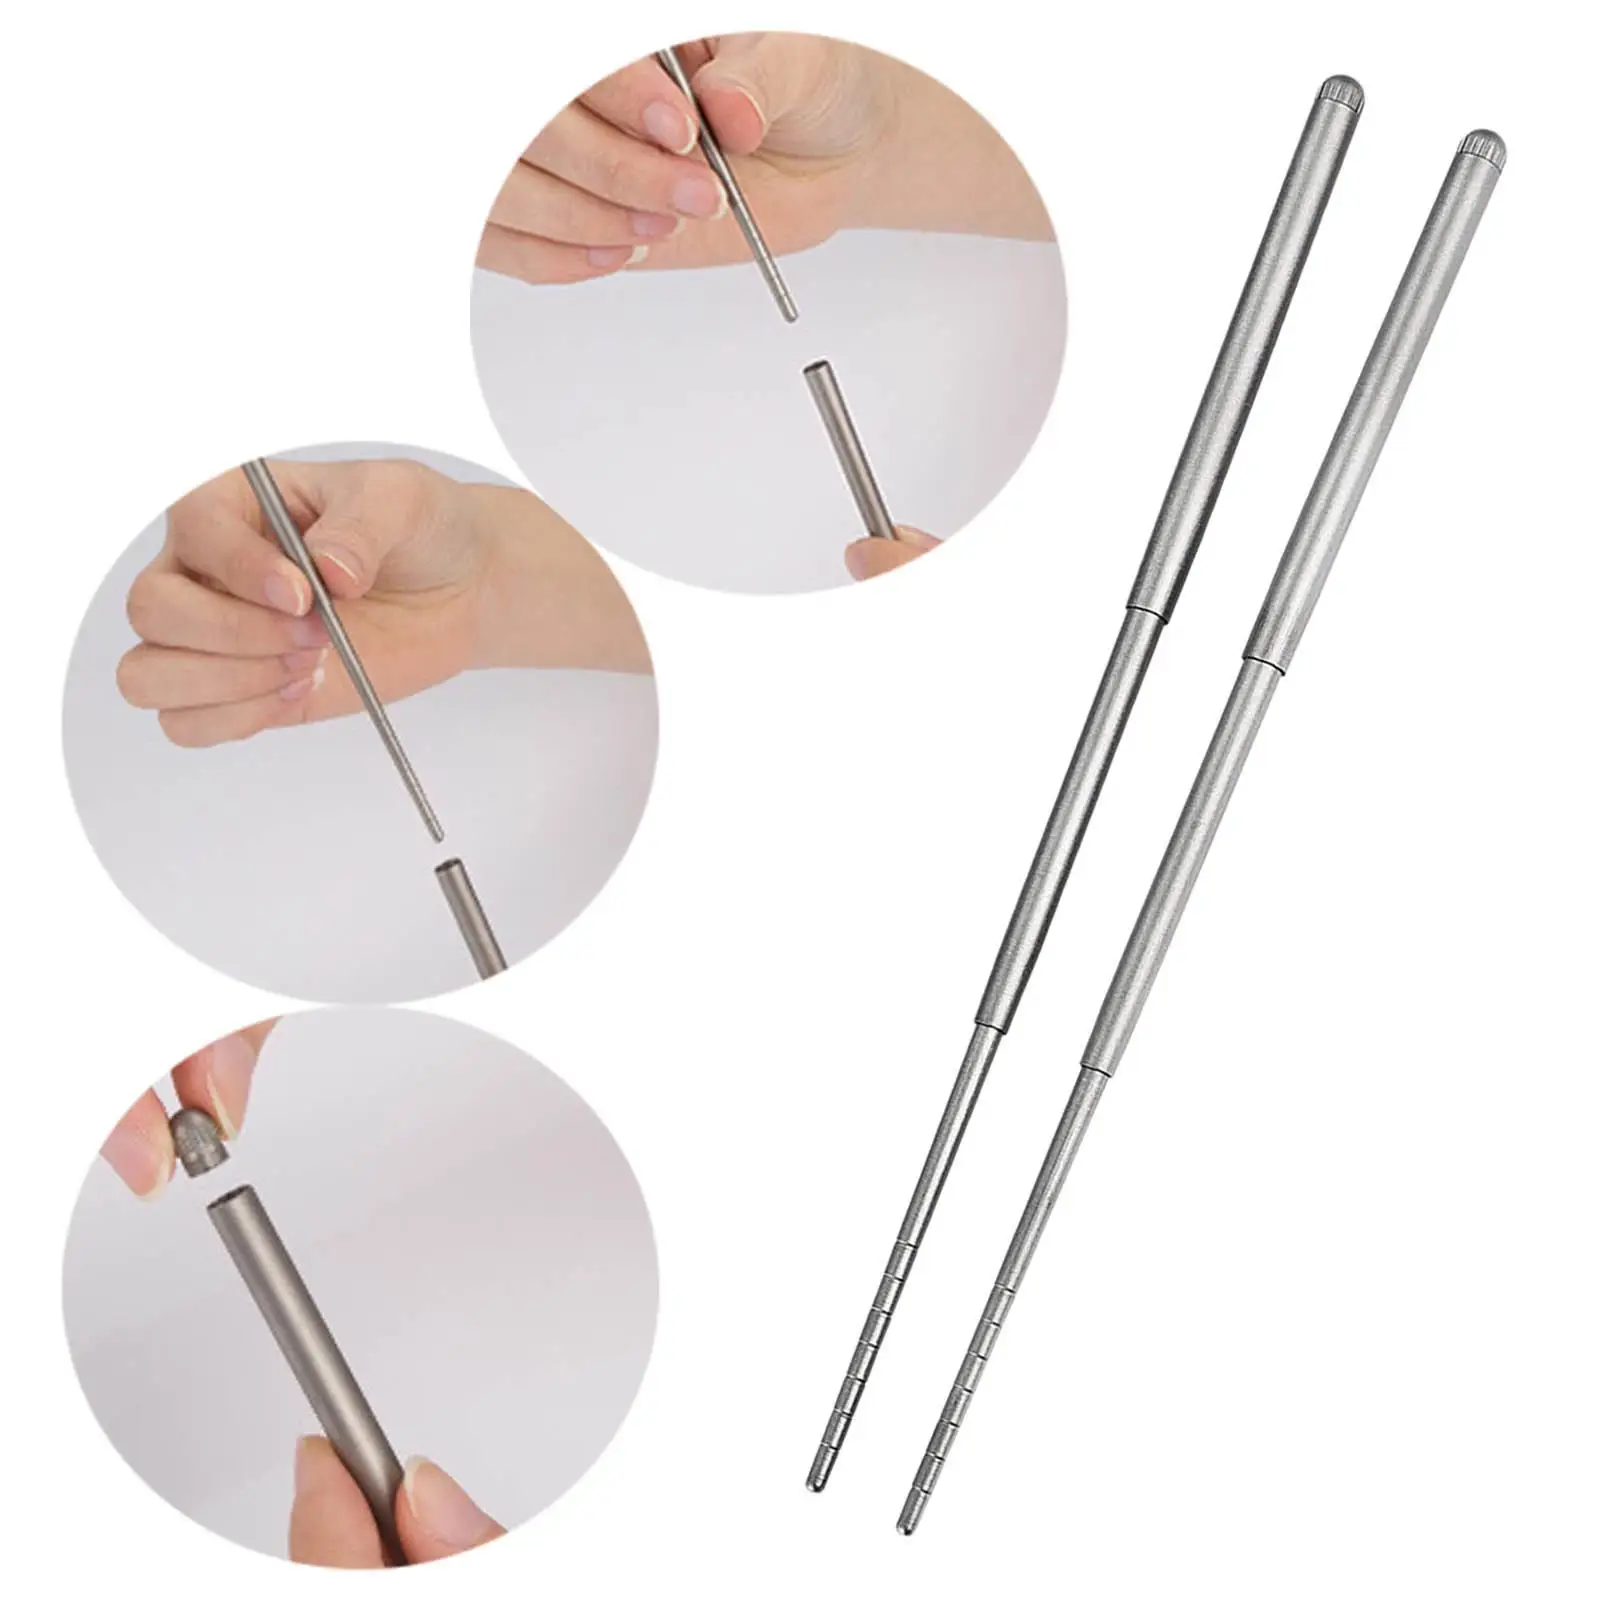 Portable Titanium Folding Chopsticks Cutlery Reusable Retractable Tableware Flatware for Camping Outdoor School Backpacking BBQ